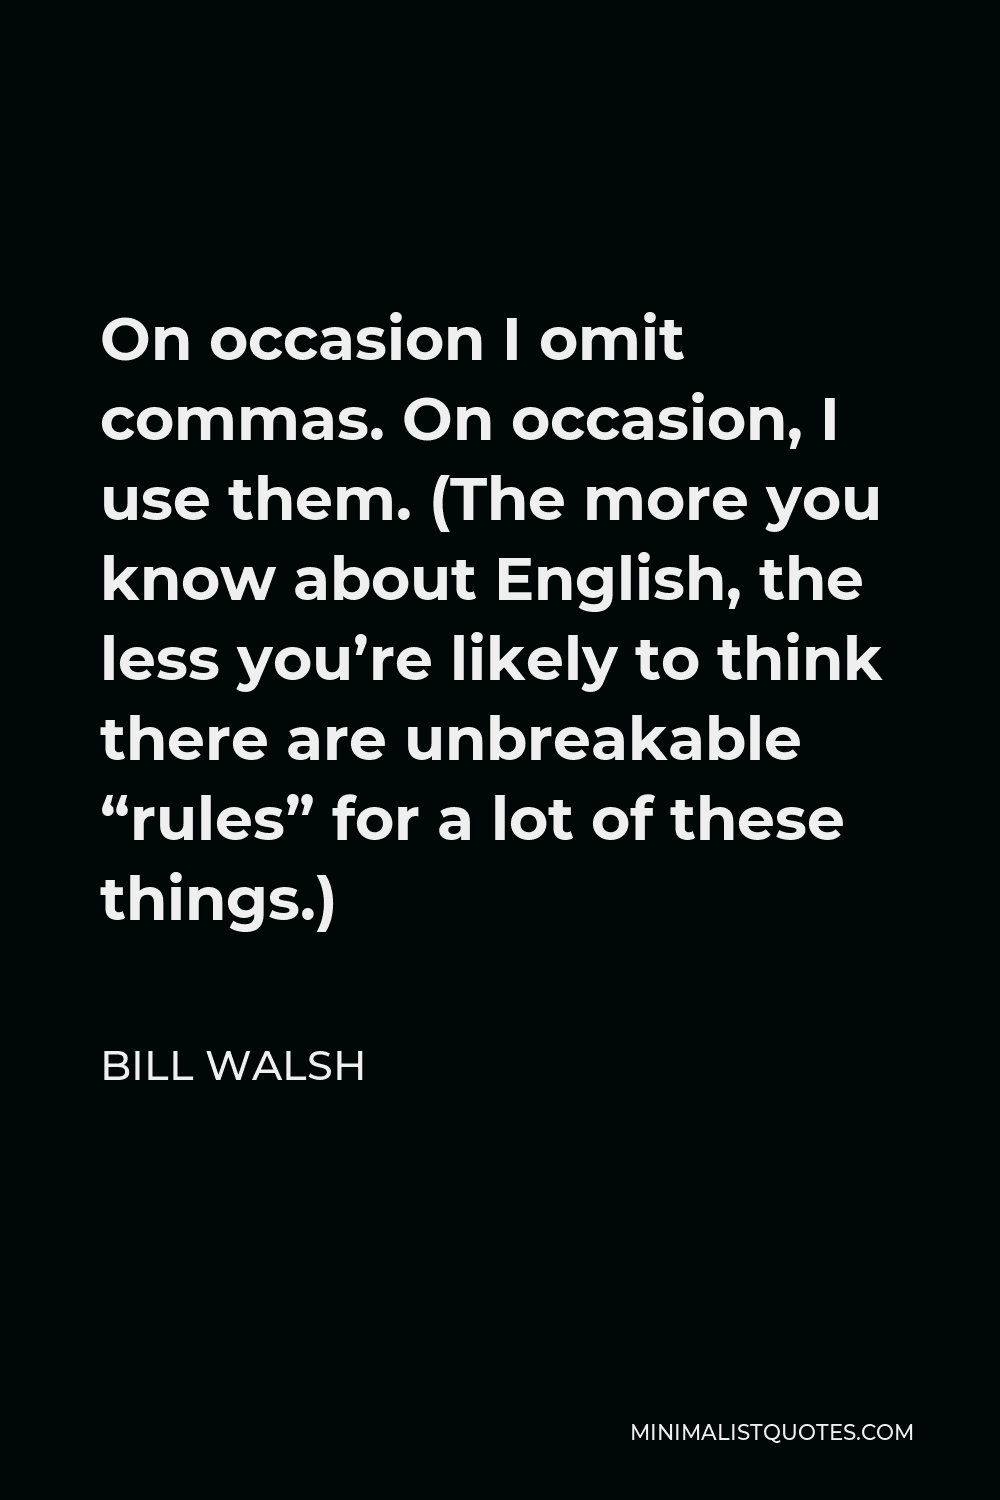 Bill Walsh Quote - On occasion I omit commas. On occasion, I use them. (The more you know about English, the less you’re likely to think there are unbreakable “rules” for a lot of these things.)